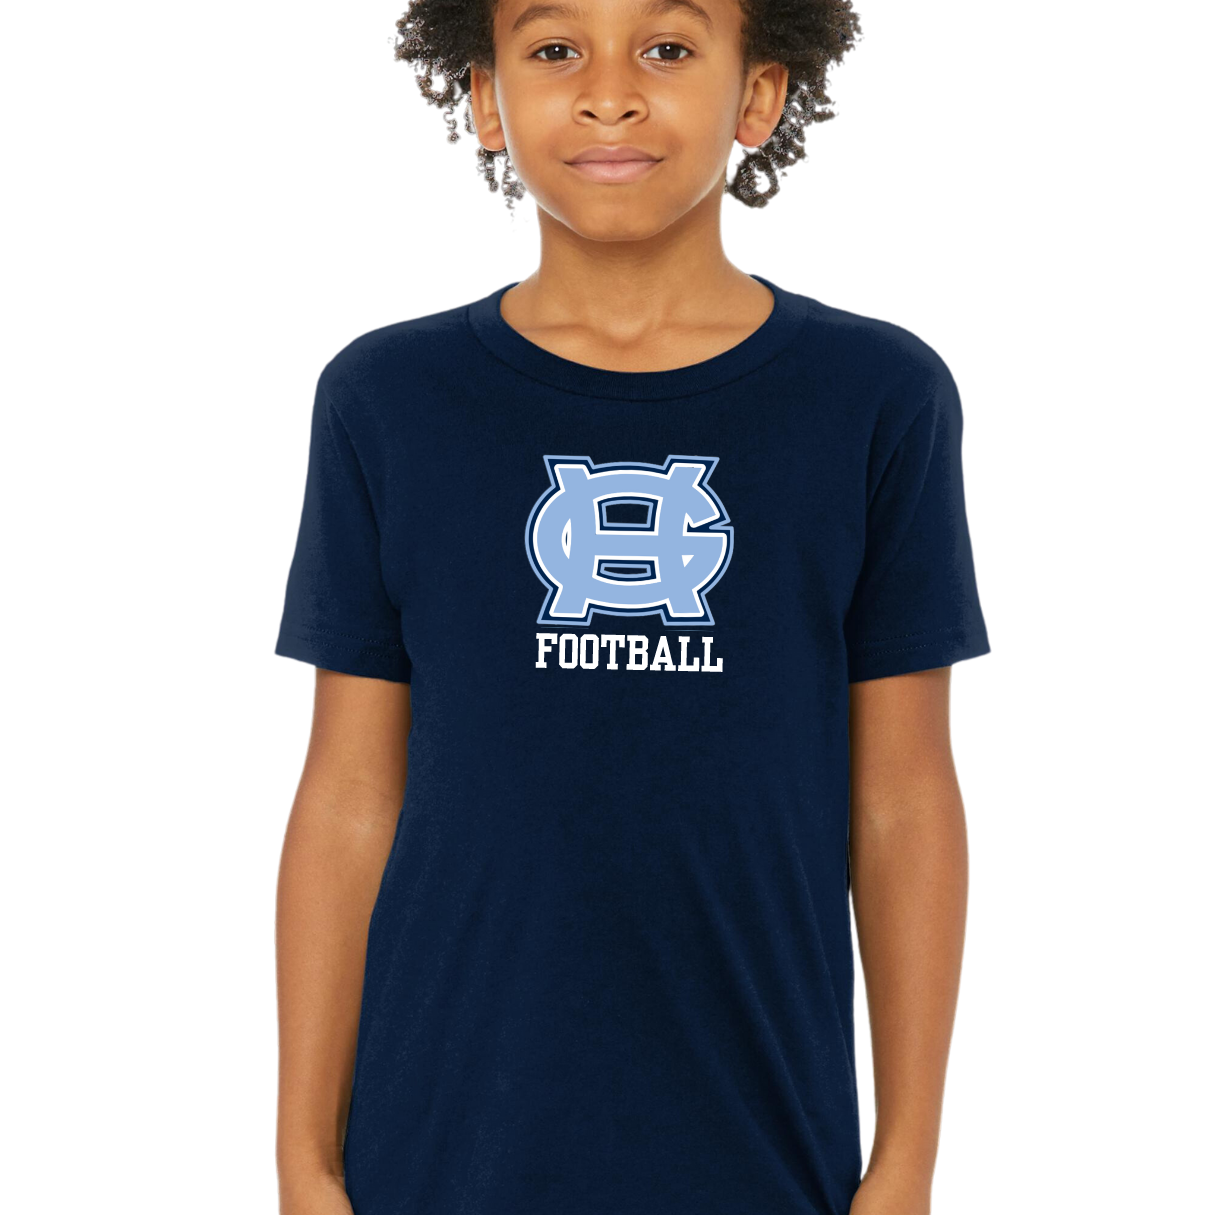 Classic GH Football Tee- Adult and Youth